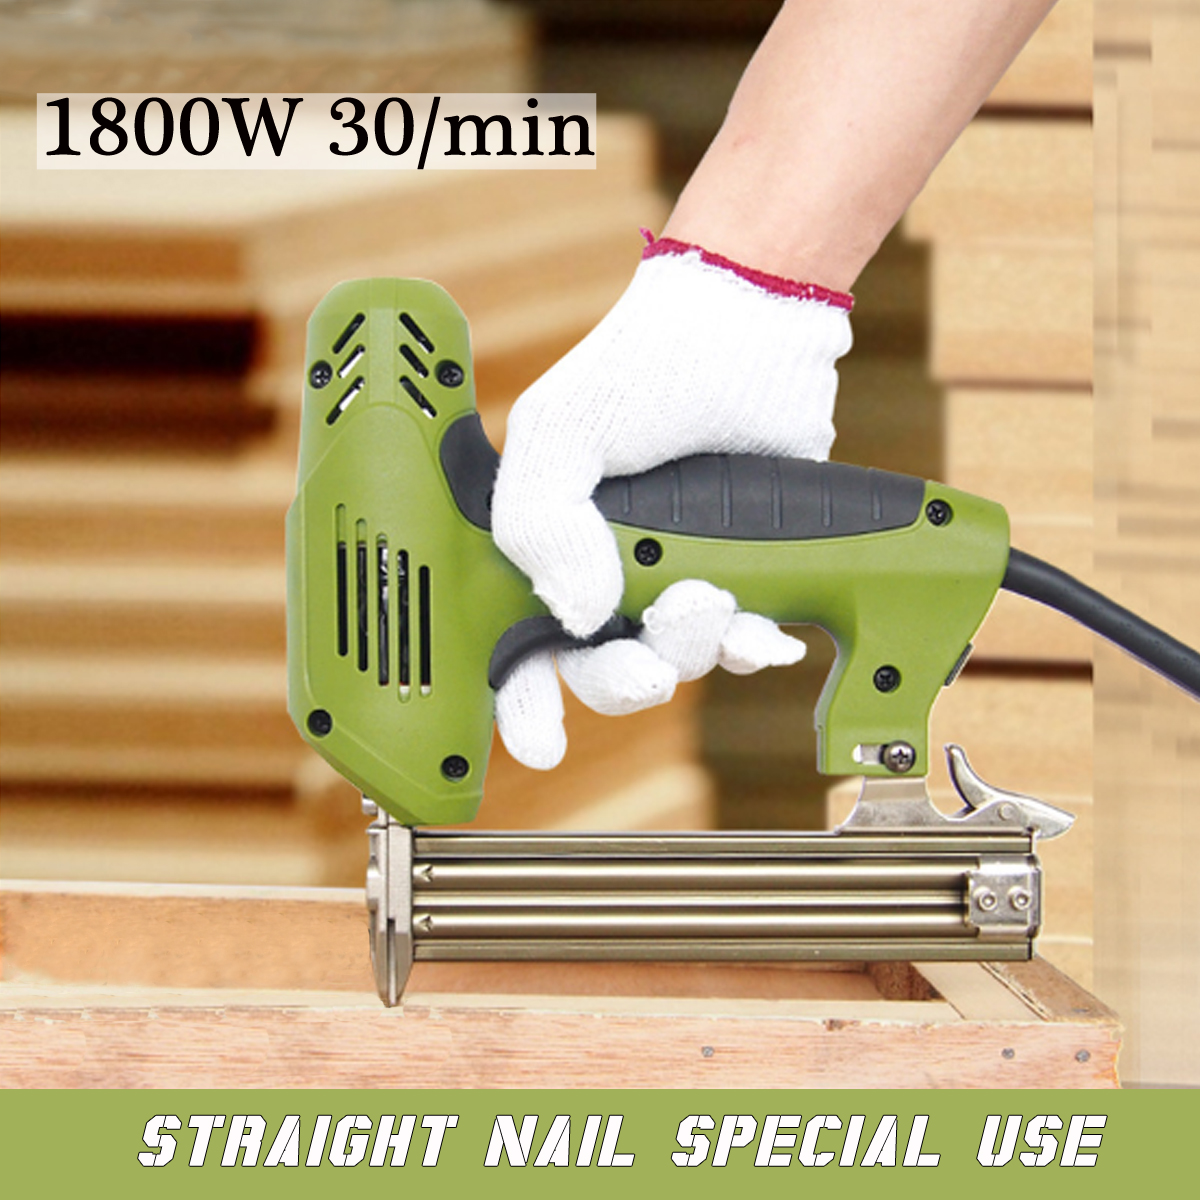 220V-1800W-Electric-Staple-Straight-Electric-Staple-Straight-Nail-Guns-10-30mm-Special-Use-30min-Woo-1192232-2